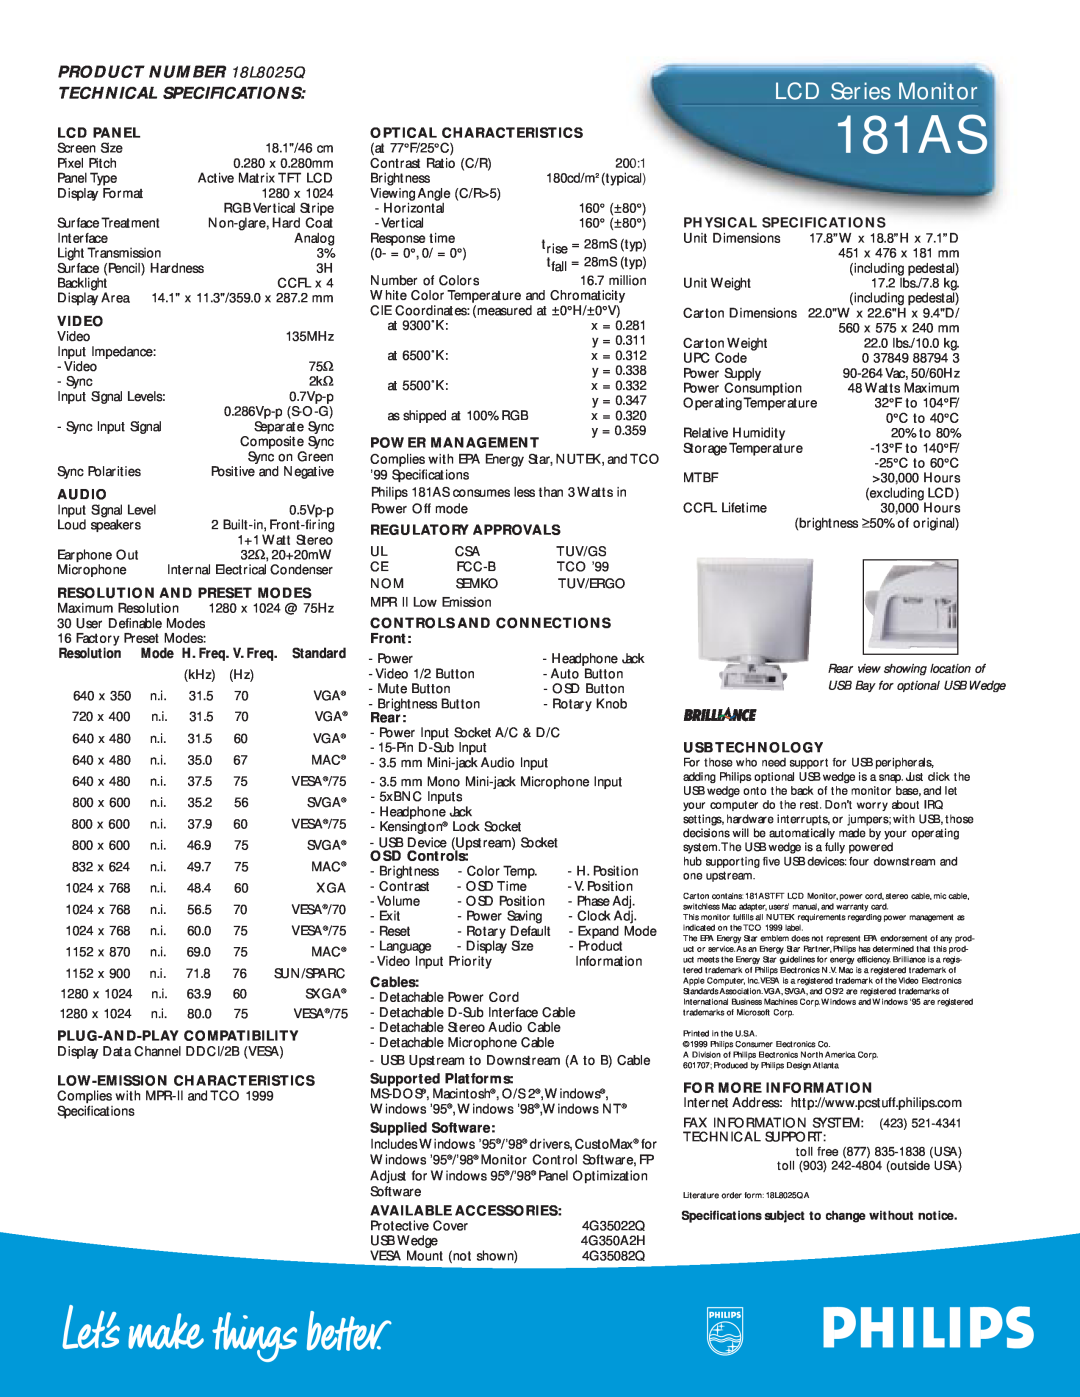 Philips 181AS manual LCD Series Monitor, PRODUCT NUMBER 18L8025Q TECHNICAL SPECIFICATIONS, Rear view showing location of 